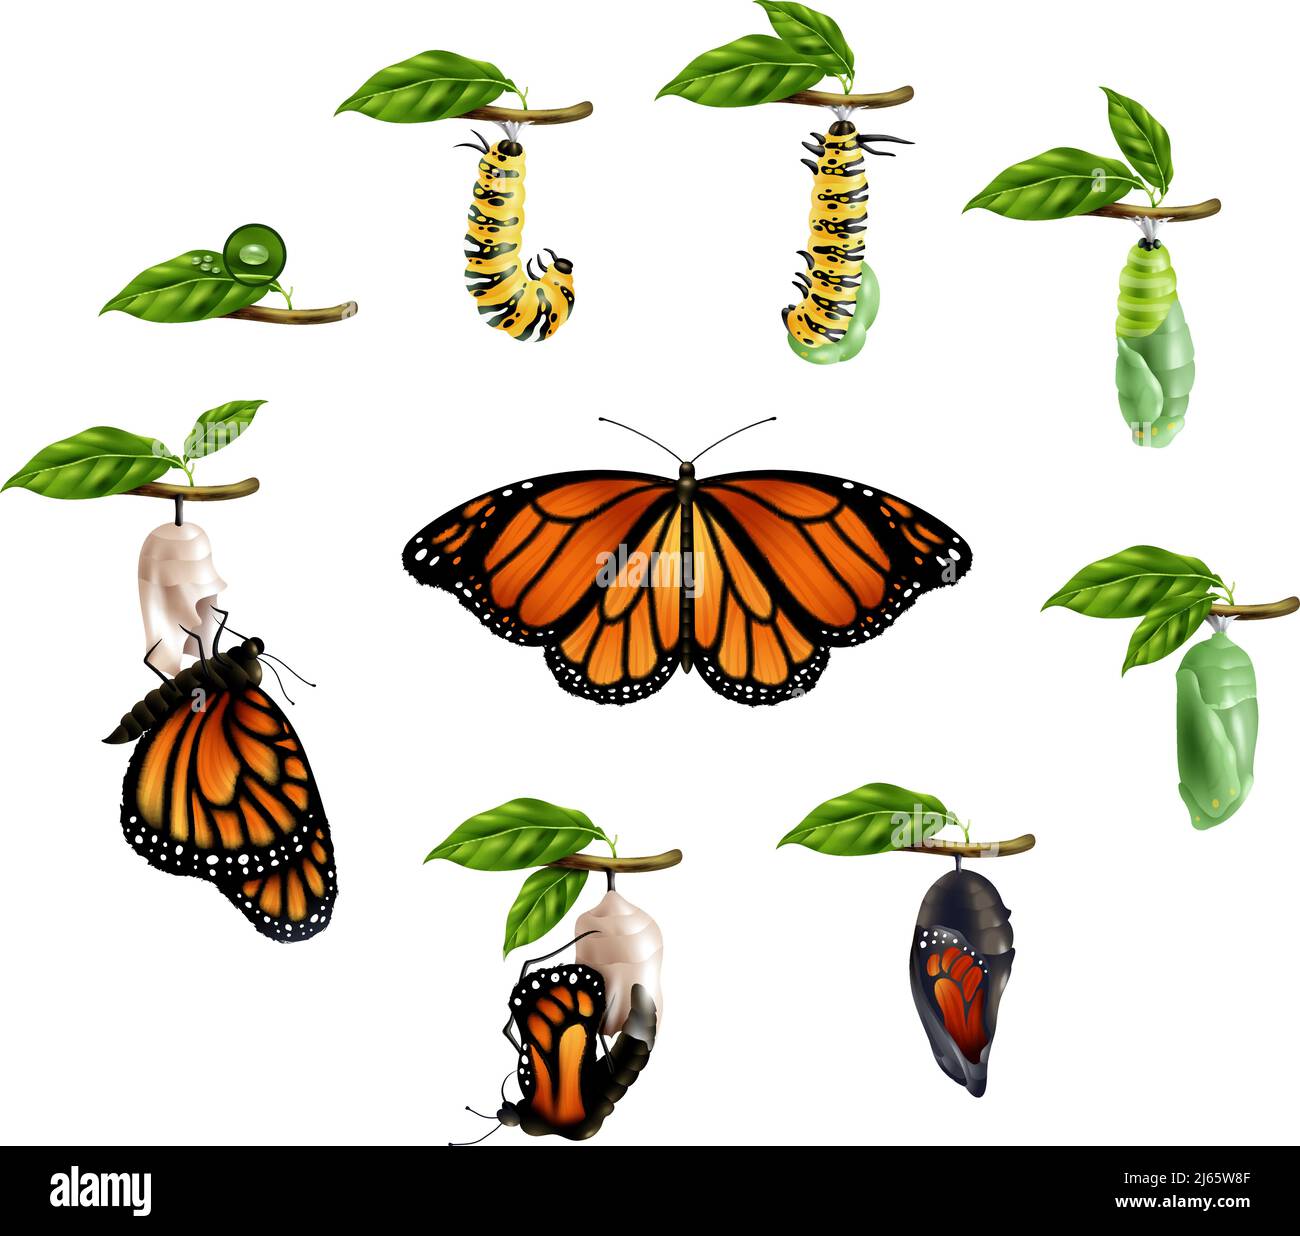 Life cycle of butterfly realistic icons set of caterpillar larva pupa imago phases vector illustration Stock Vector